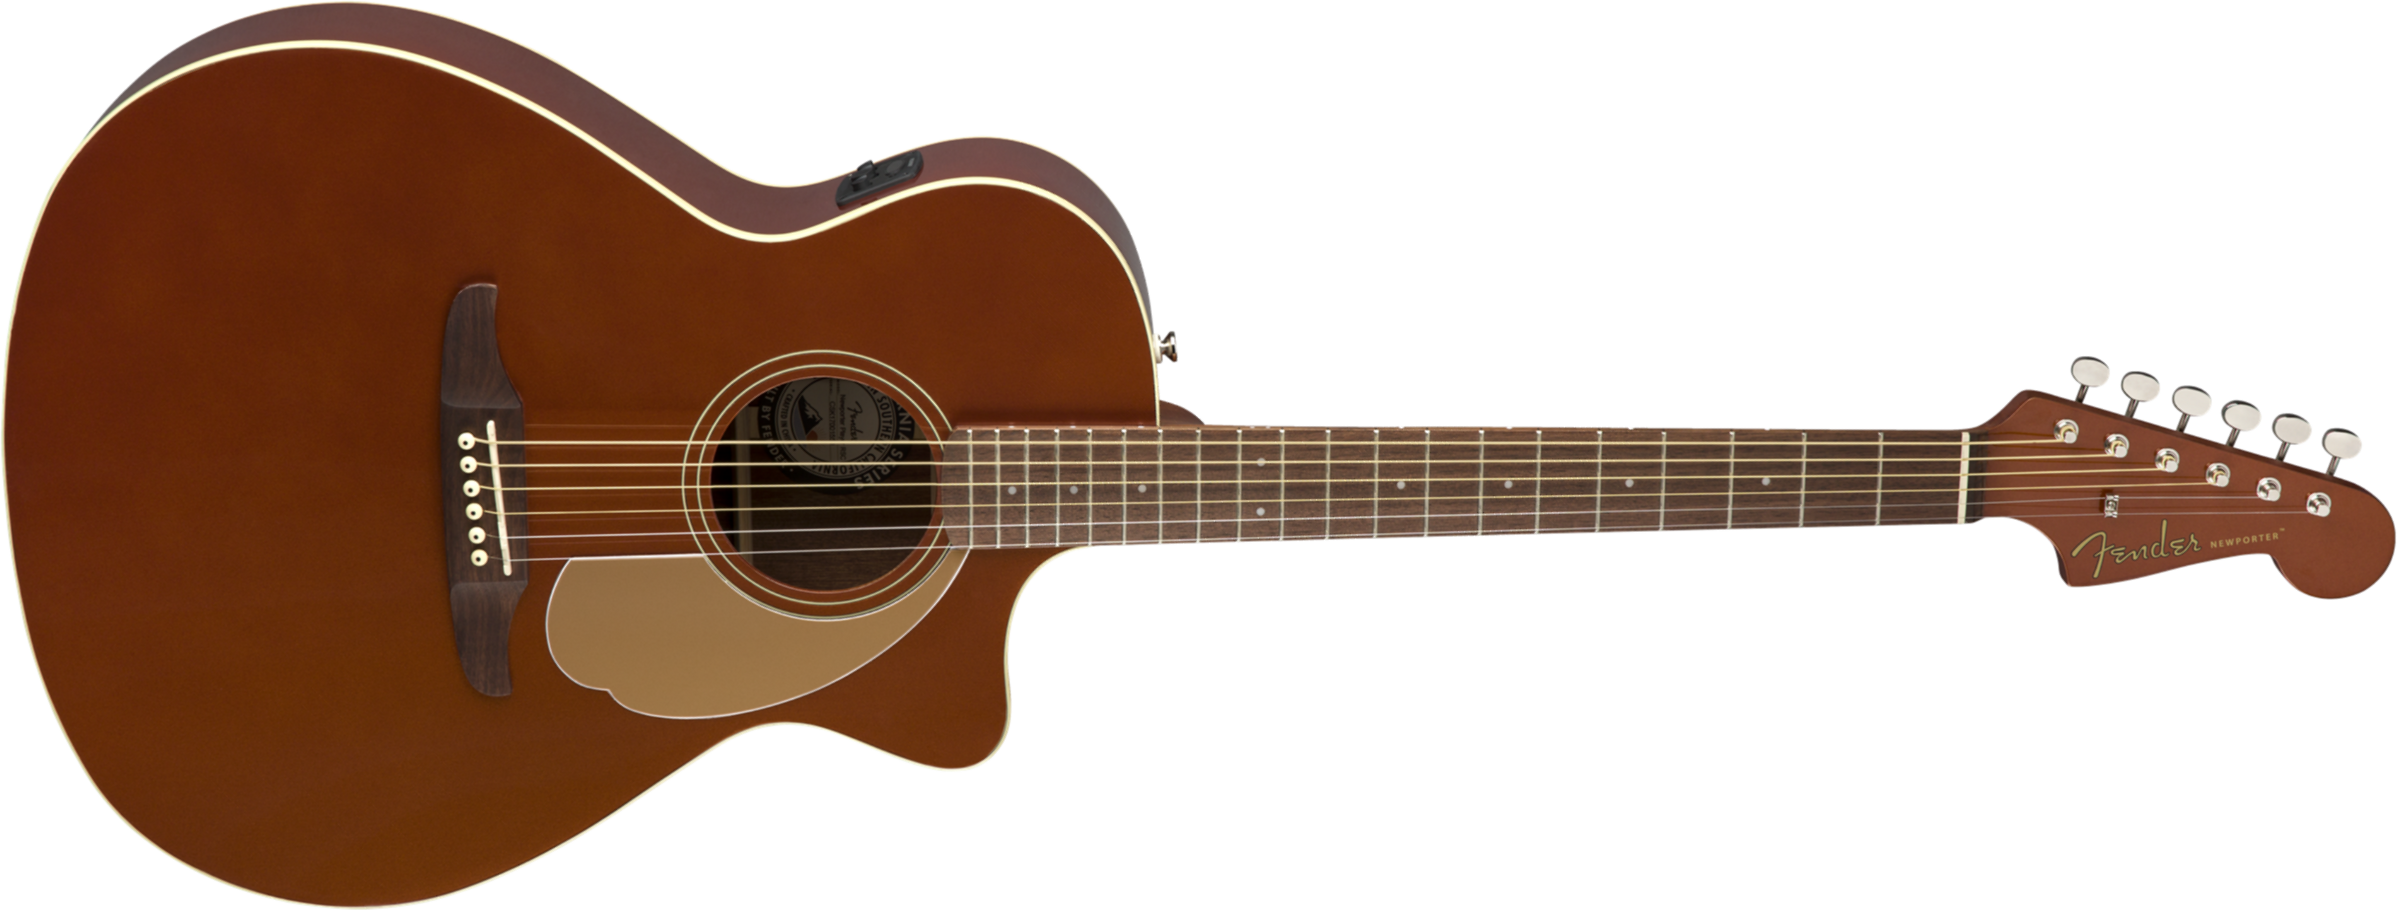 Fender Newporter Player - Rustic Copper - Acoustic guitar & electro - Main picture